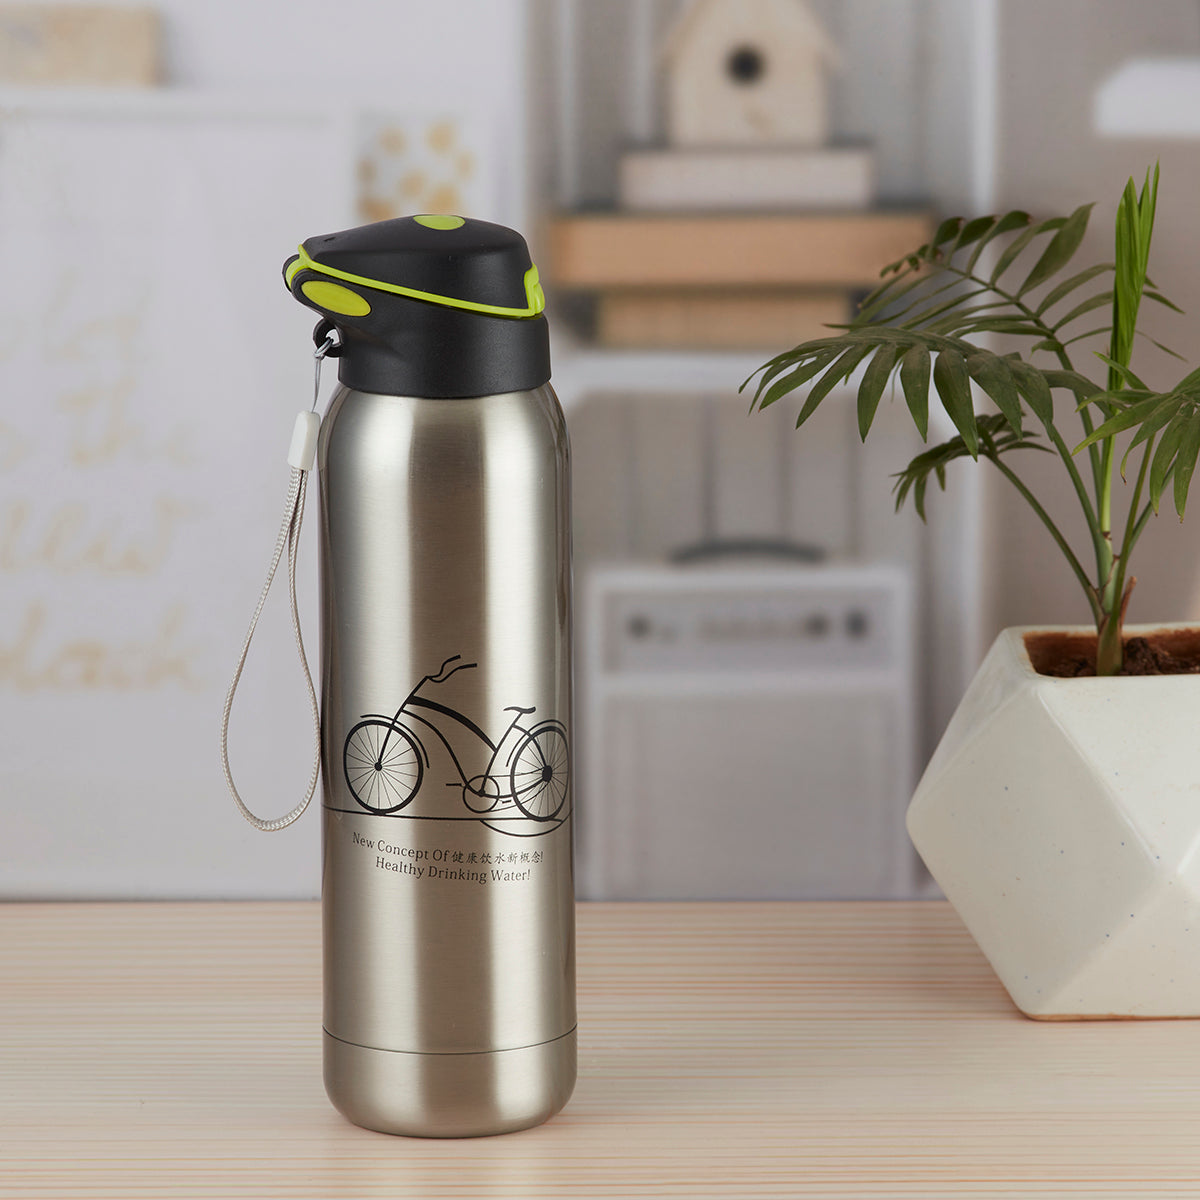 Stainless Steel Vacuum Insulated double wall Water Bottle for Home, Office, Travel and Sports, Leak - proof Lid for Hot and Cold liquids - 500ml (8426-1-A)